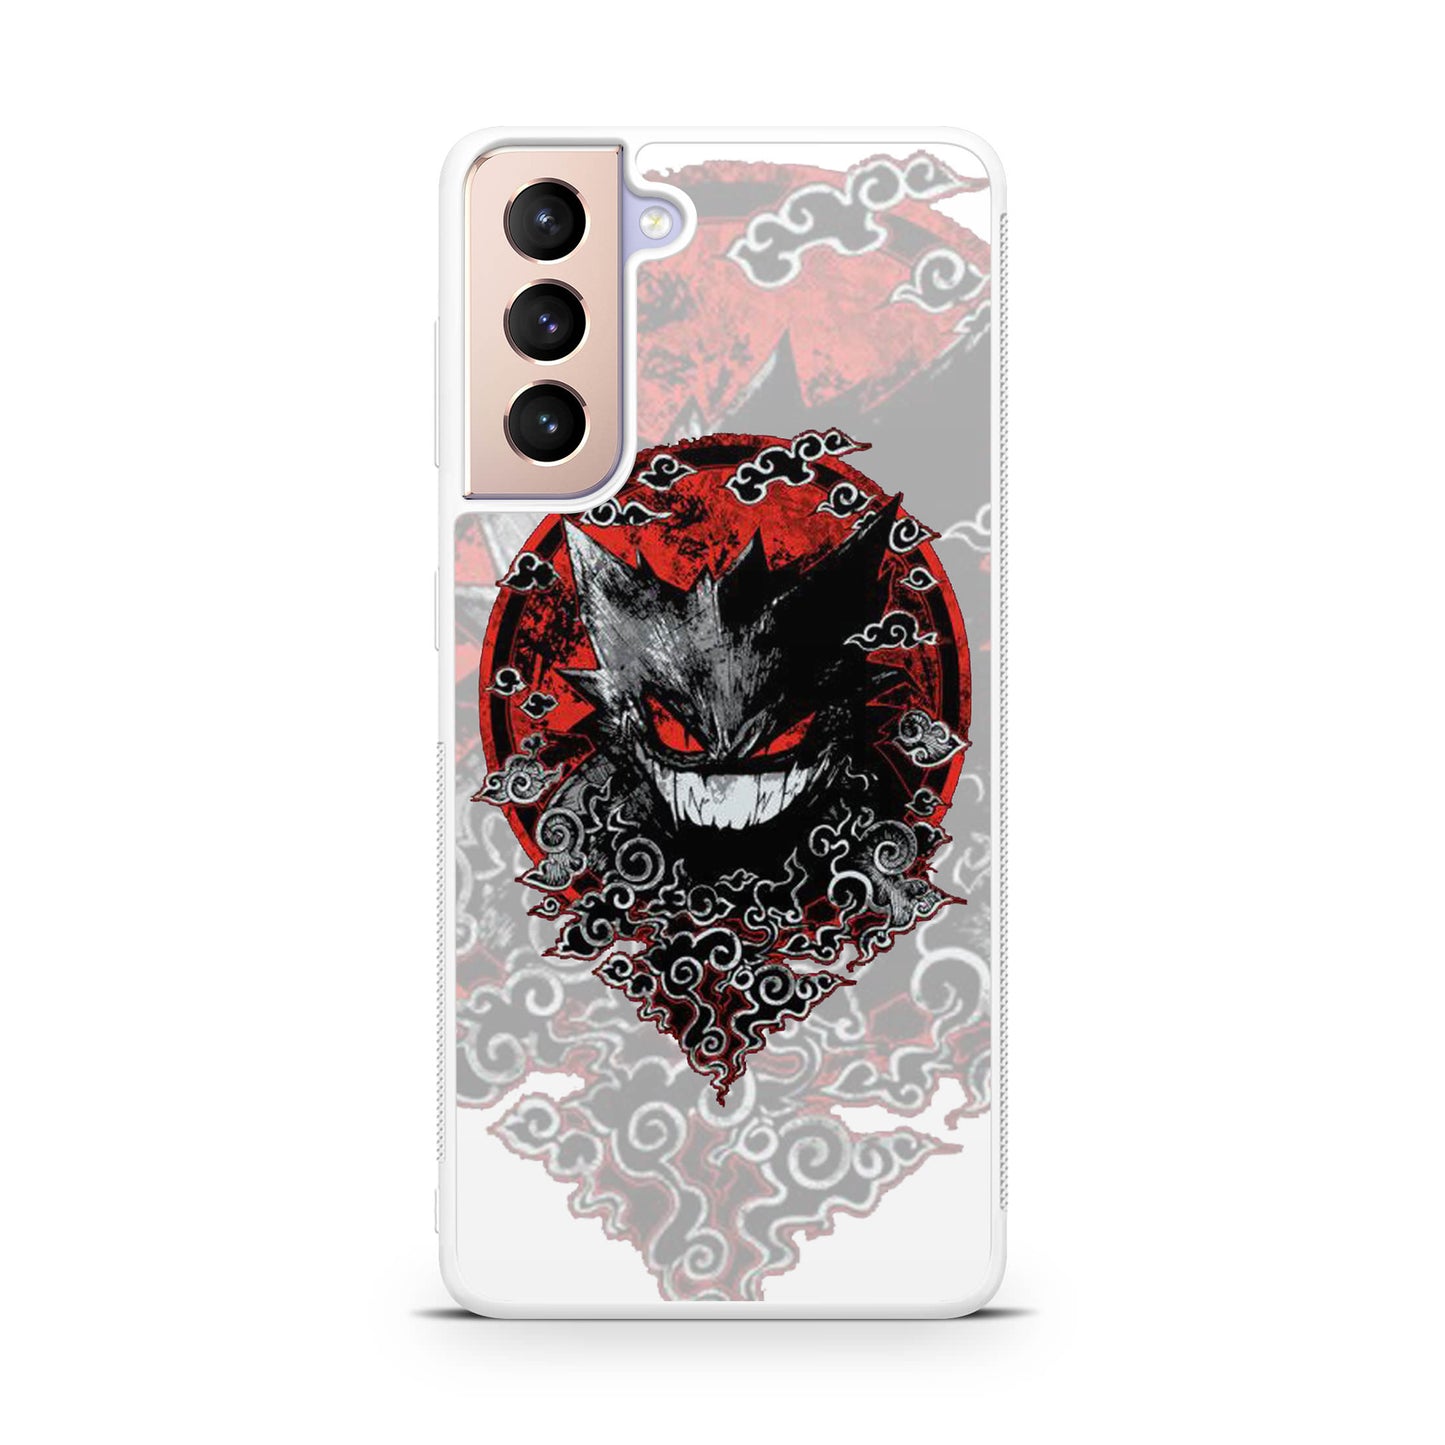 Gengar The Ghost Galaxy S21 / S21 Plus / S21 FE 5G Case